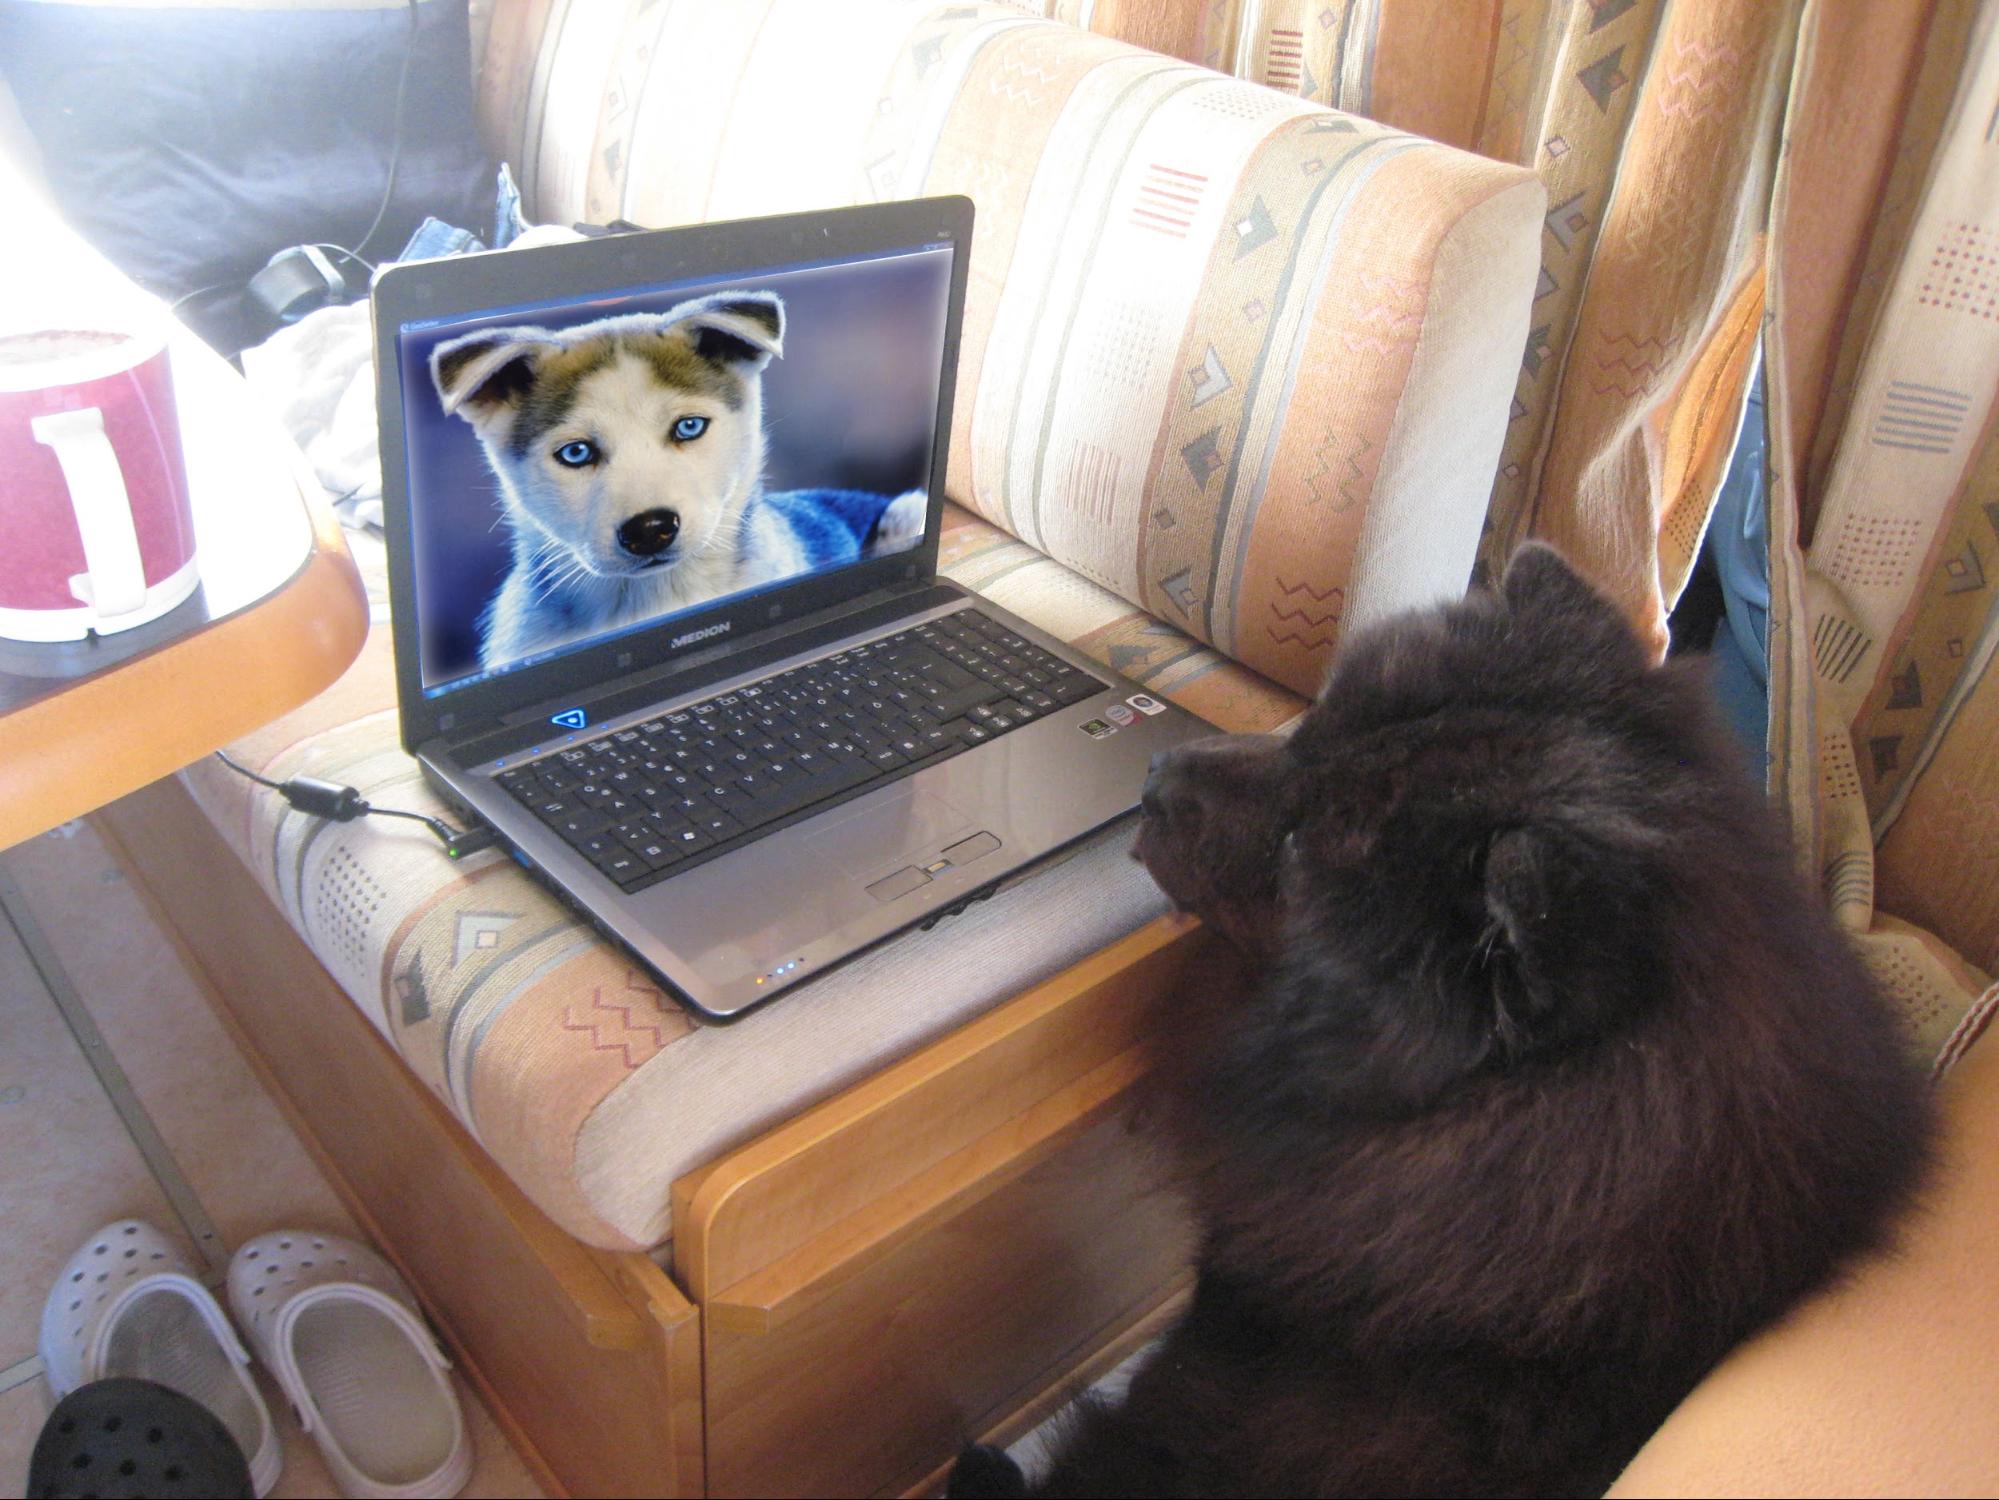 a dog video-chatting with another dog.